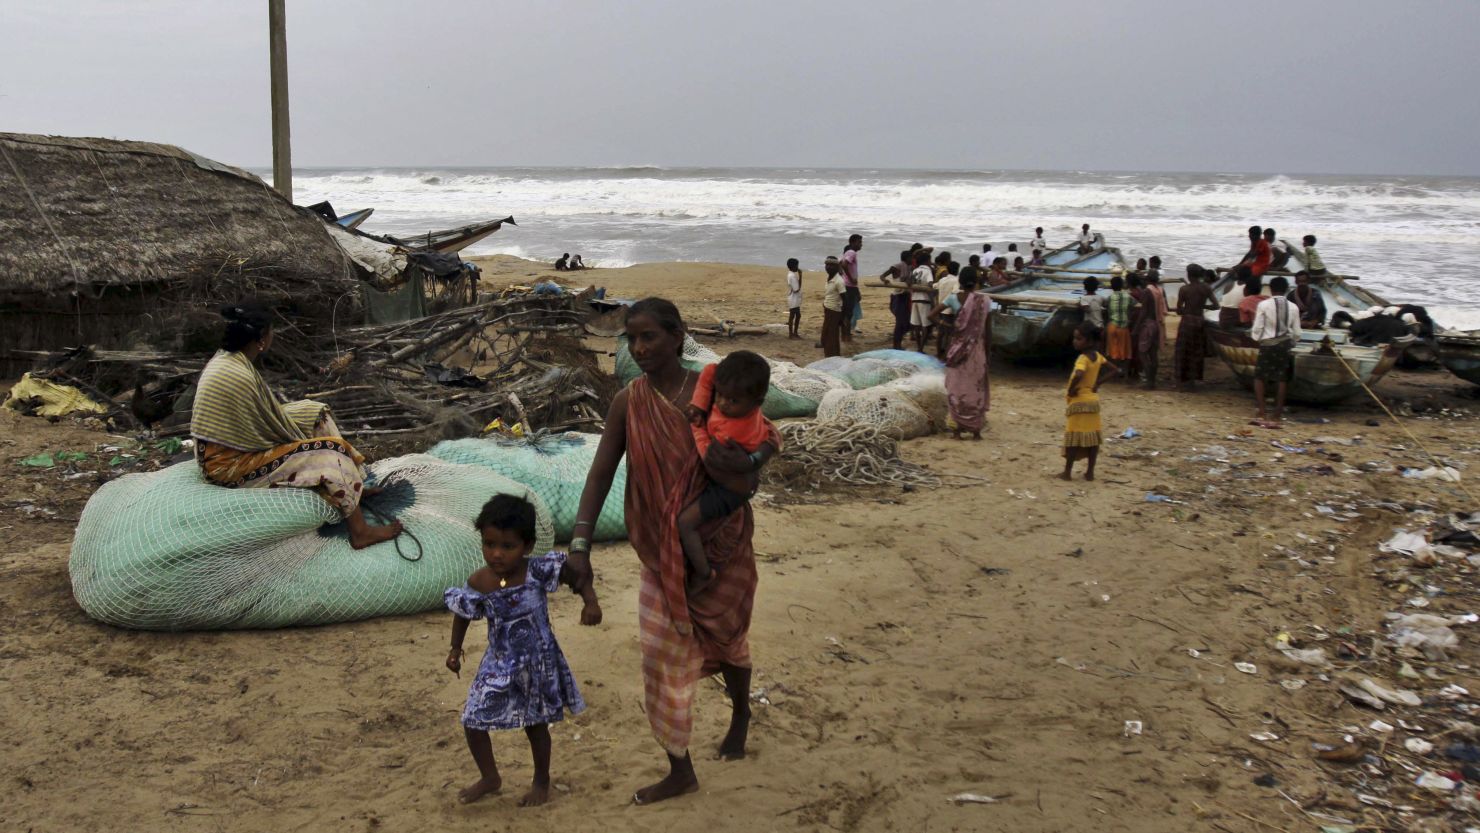 An Indian woman leaves the coast with her children as other villagers look at the Bay of Bengal, India, on Friday.